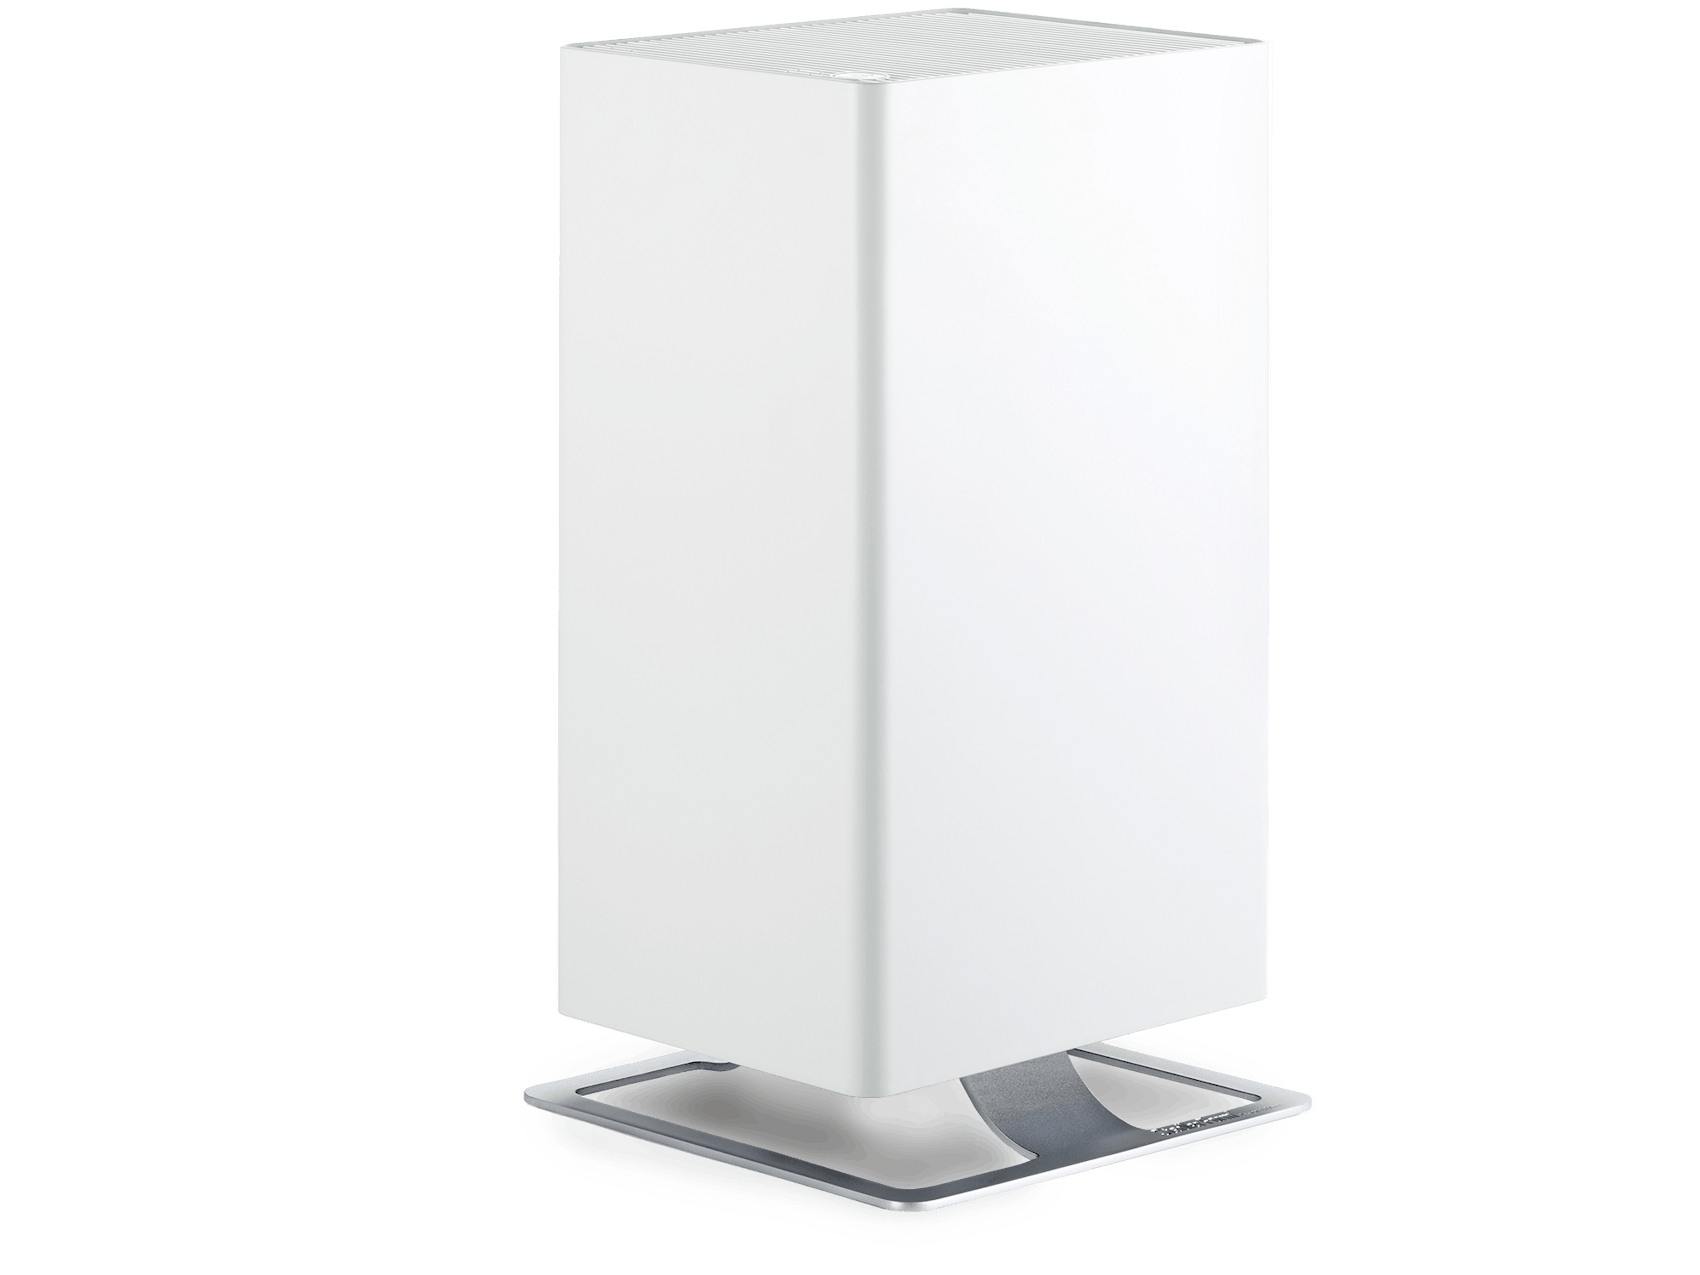 Viktor air purifier by Stadler Form in white as perspective view